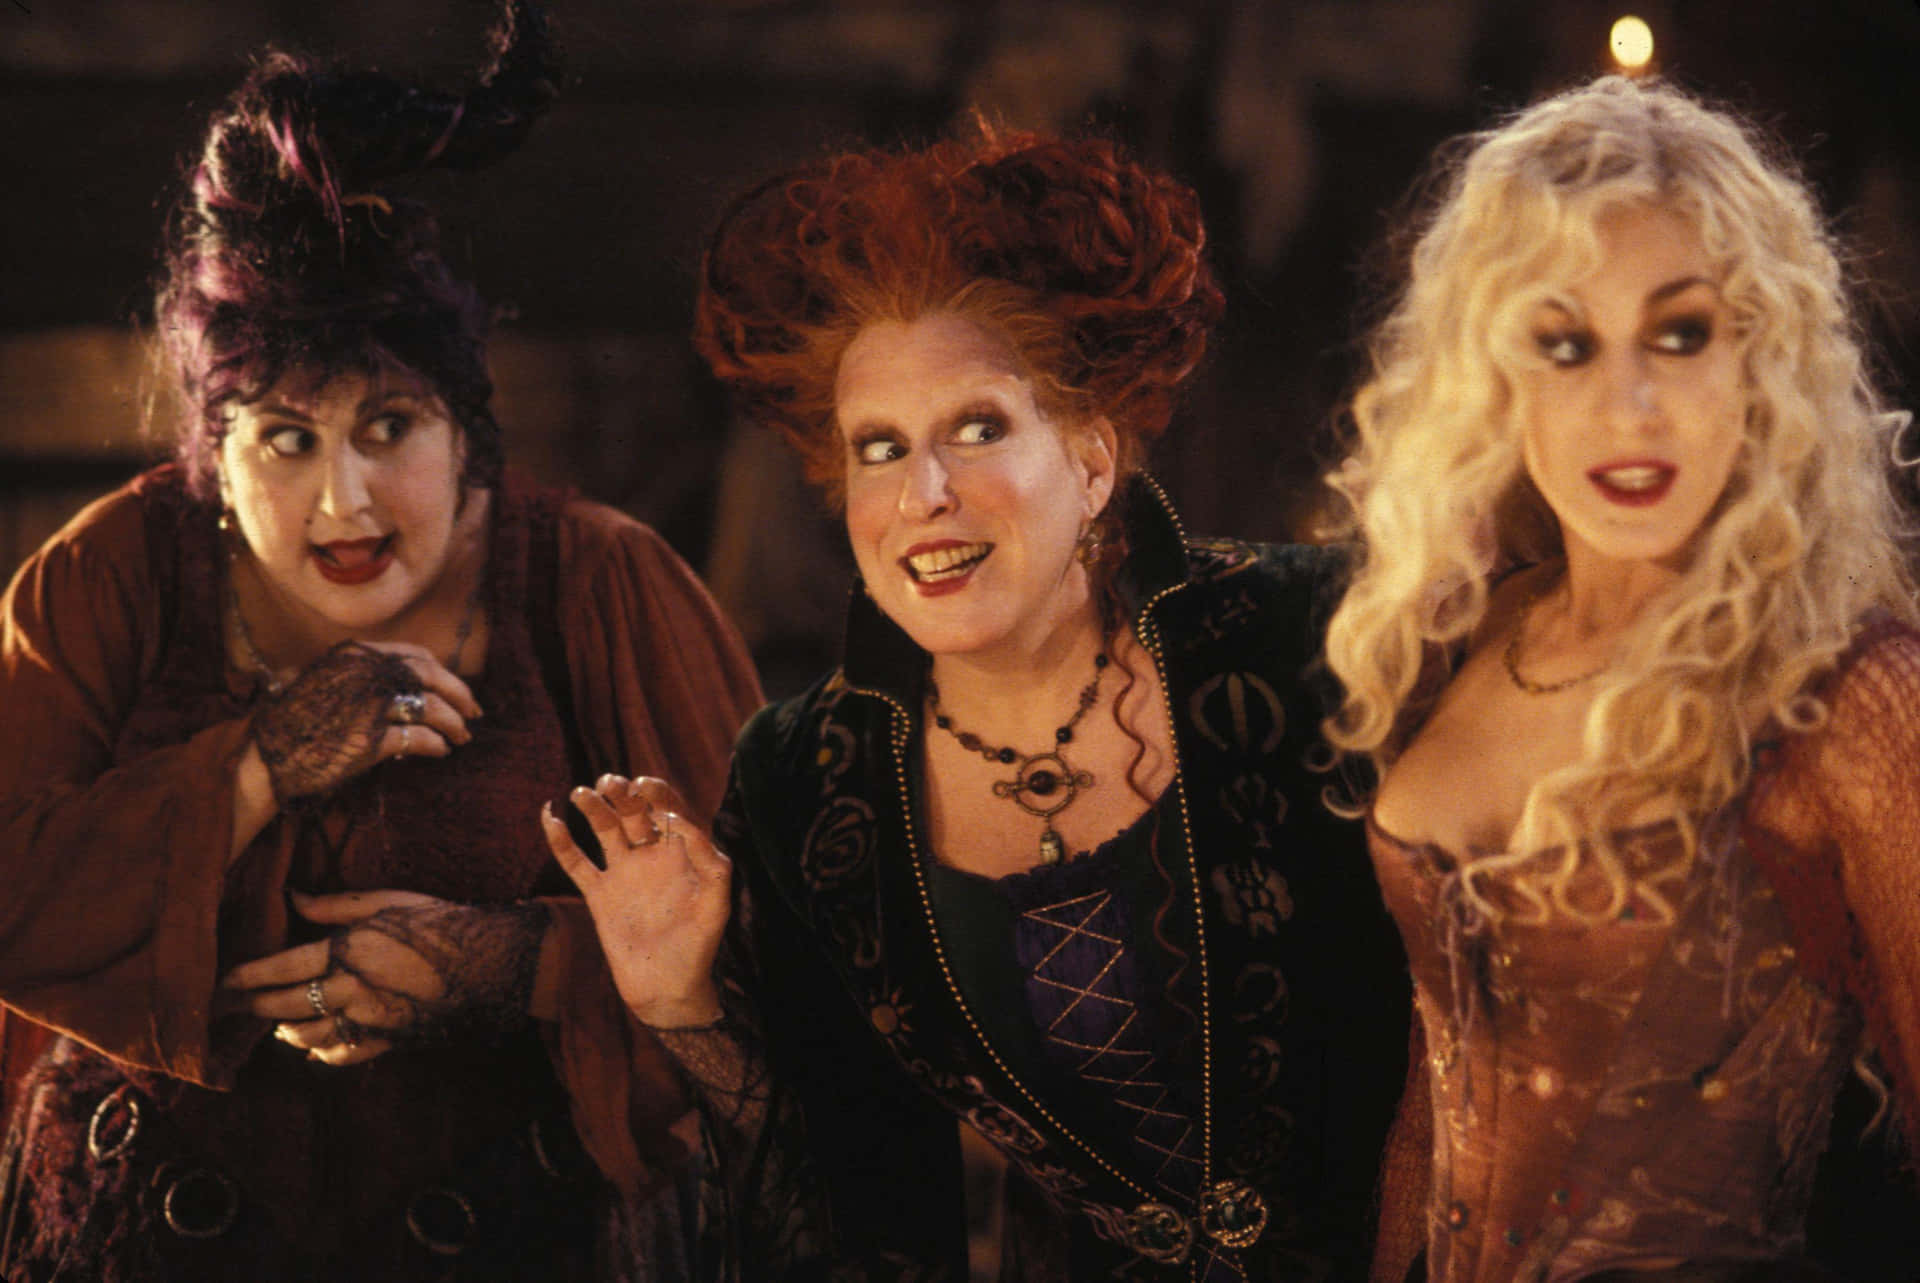 "The Sanderson sisters make a powerful return in the cult classic Hocus Pocus!"